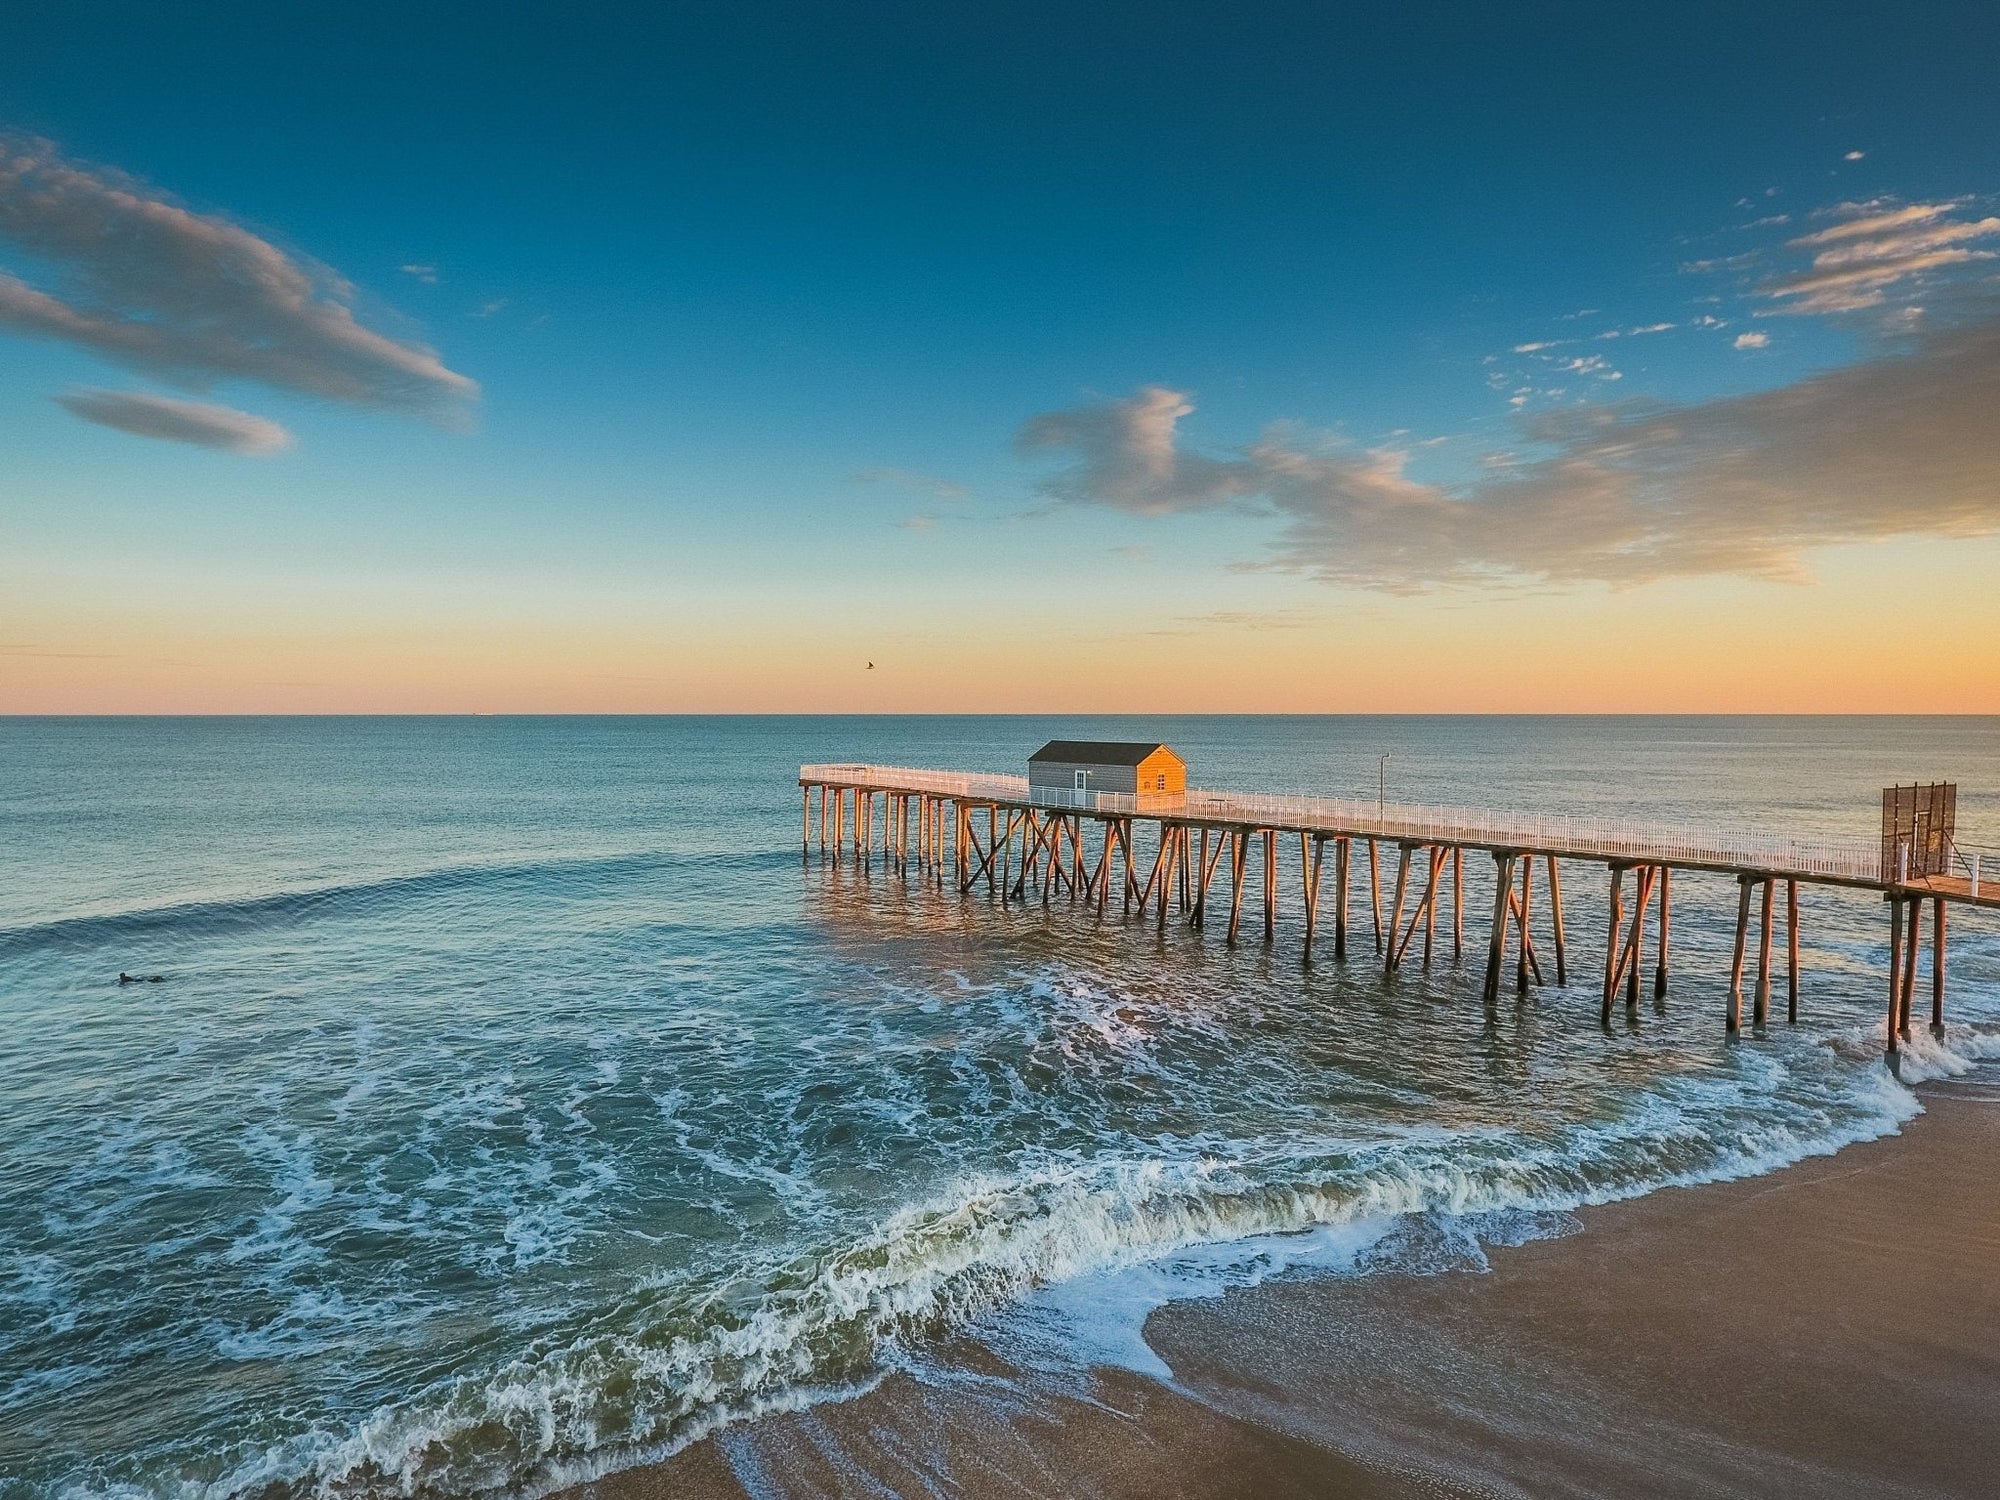 In Stock Belmar Fishing Pier 22 19 Matted and Framed in White Bill McKim Photography -Jersey Shore whale watch tours 